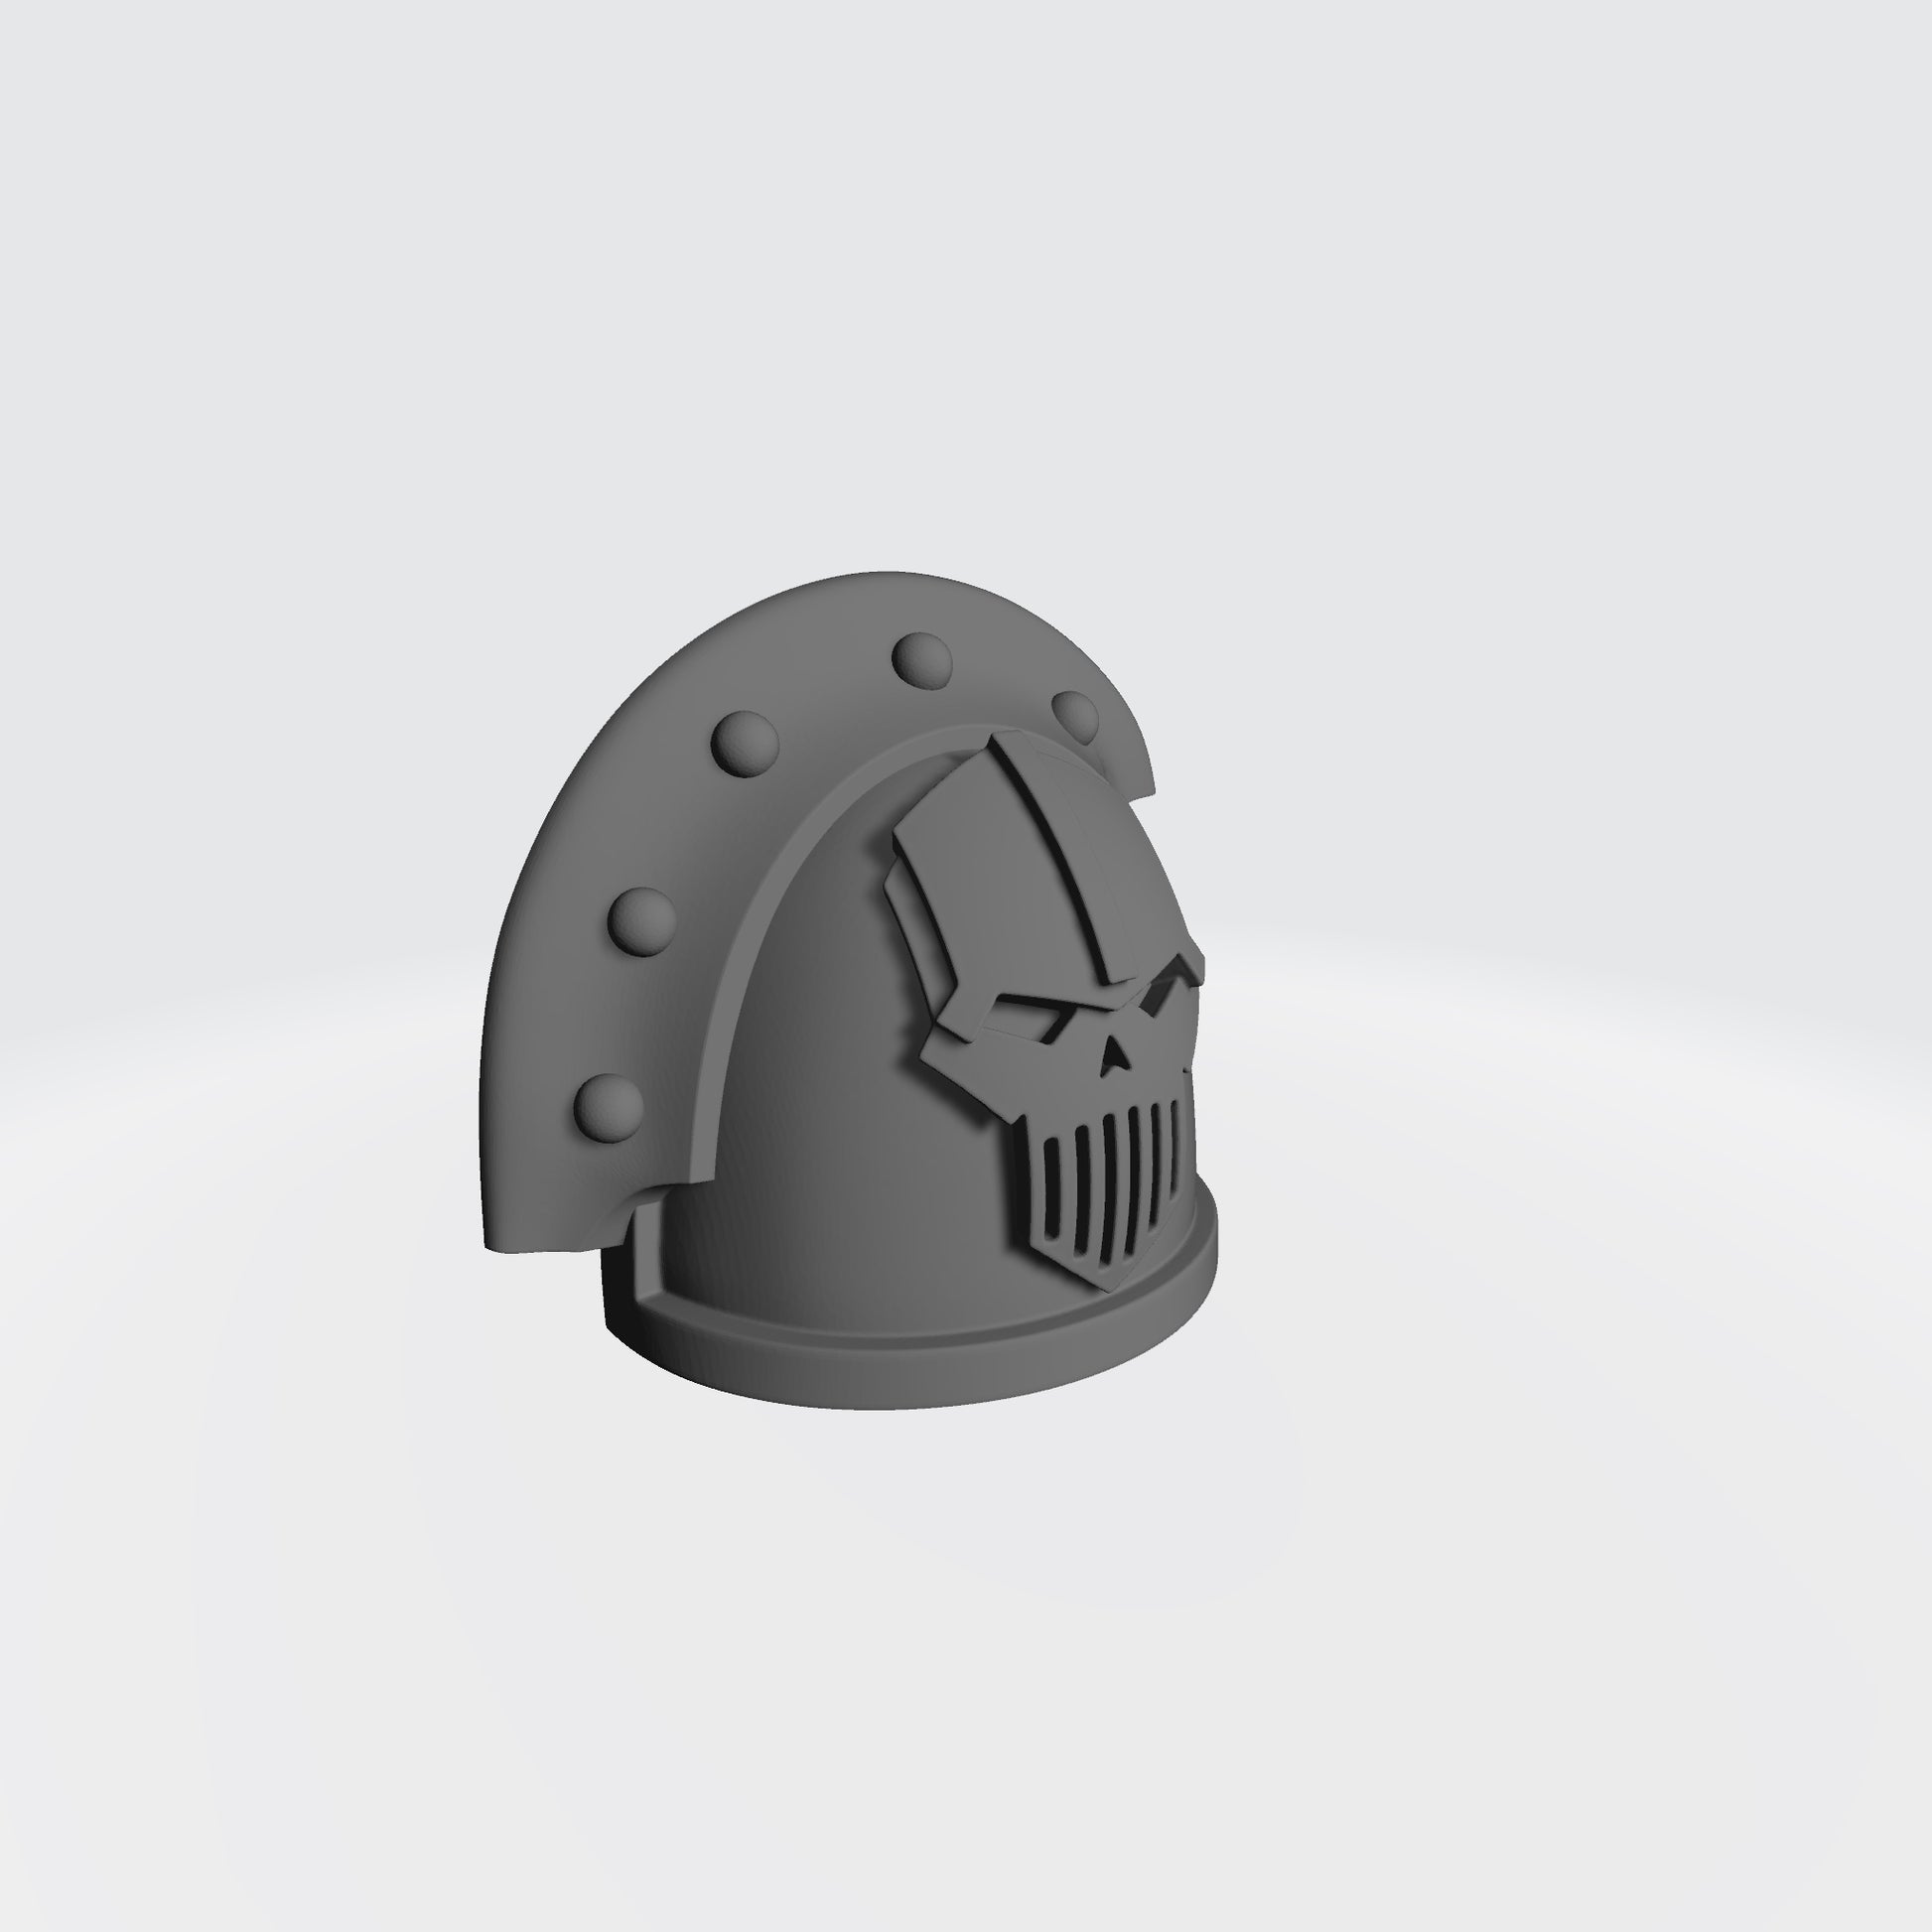 Customize Your Iron Warriors MKIII Shoulder Pad with 3 Quarter Ridge and Rivets Left Shoulder Compatible with McFarlane Toys 1:12th Scale Space Marine Action Figures Right Angle